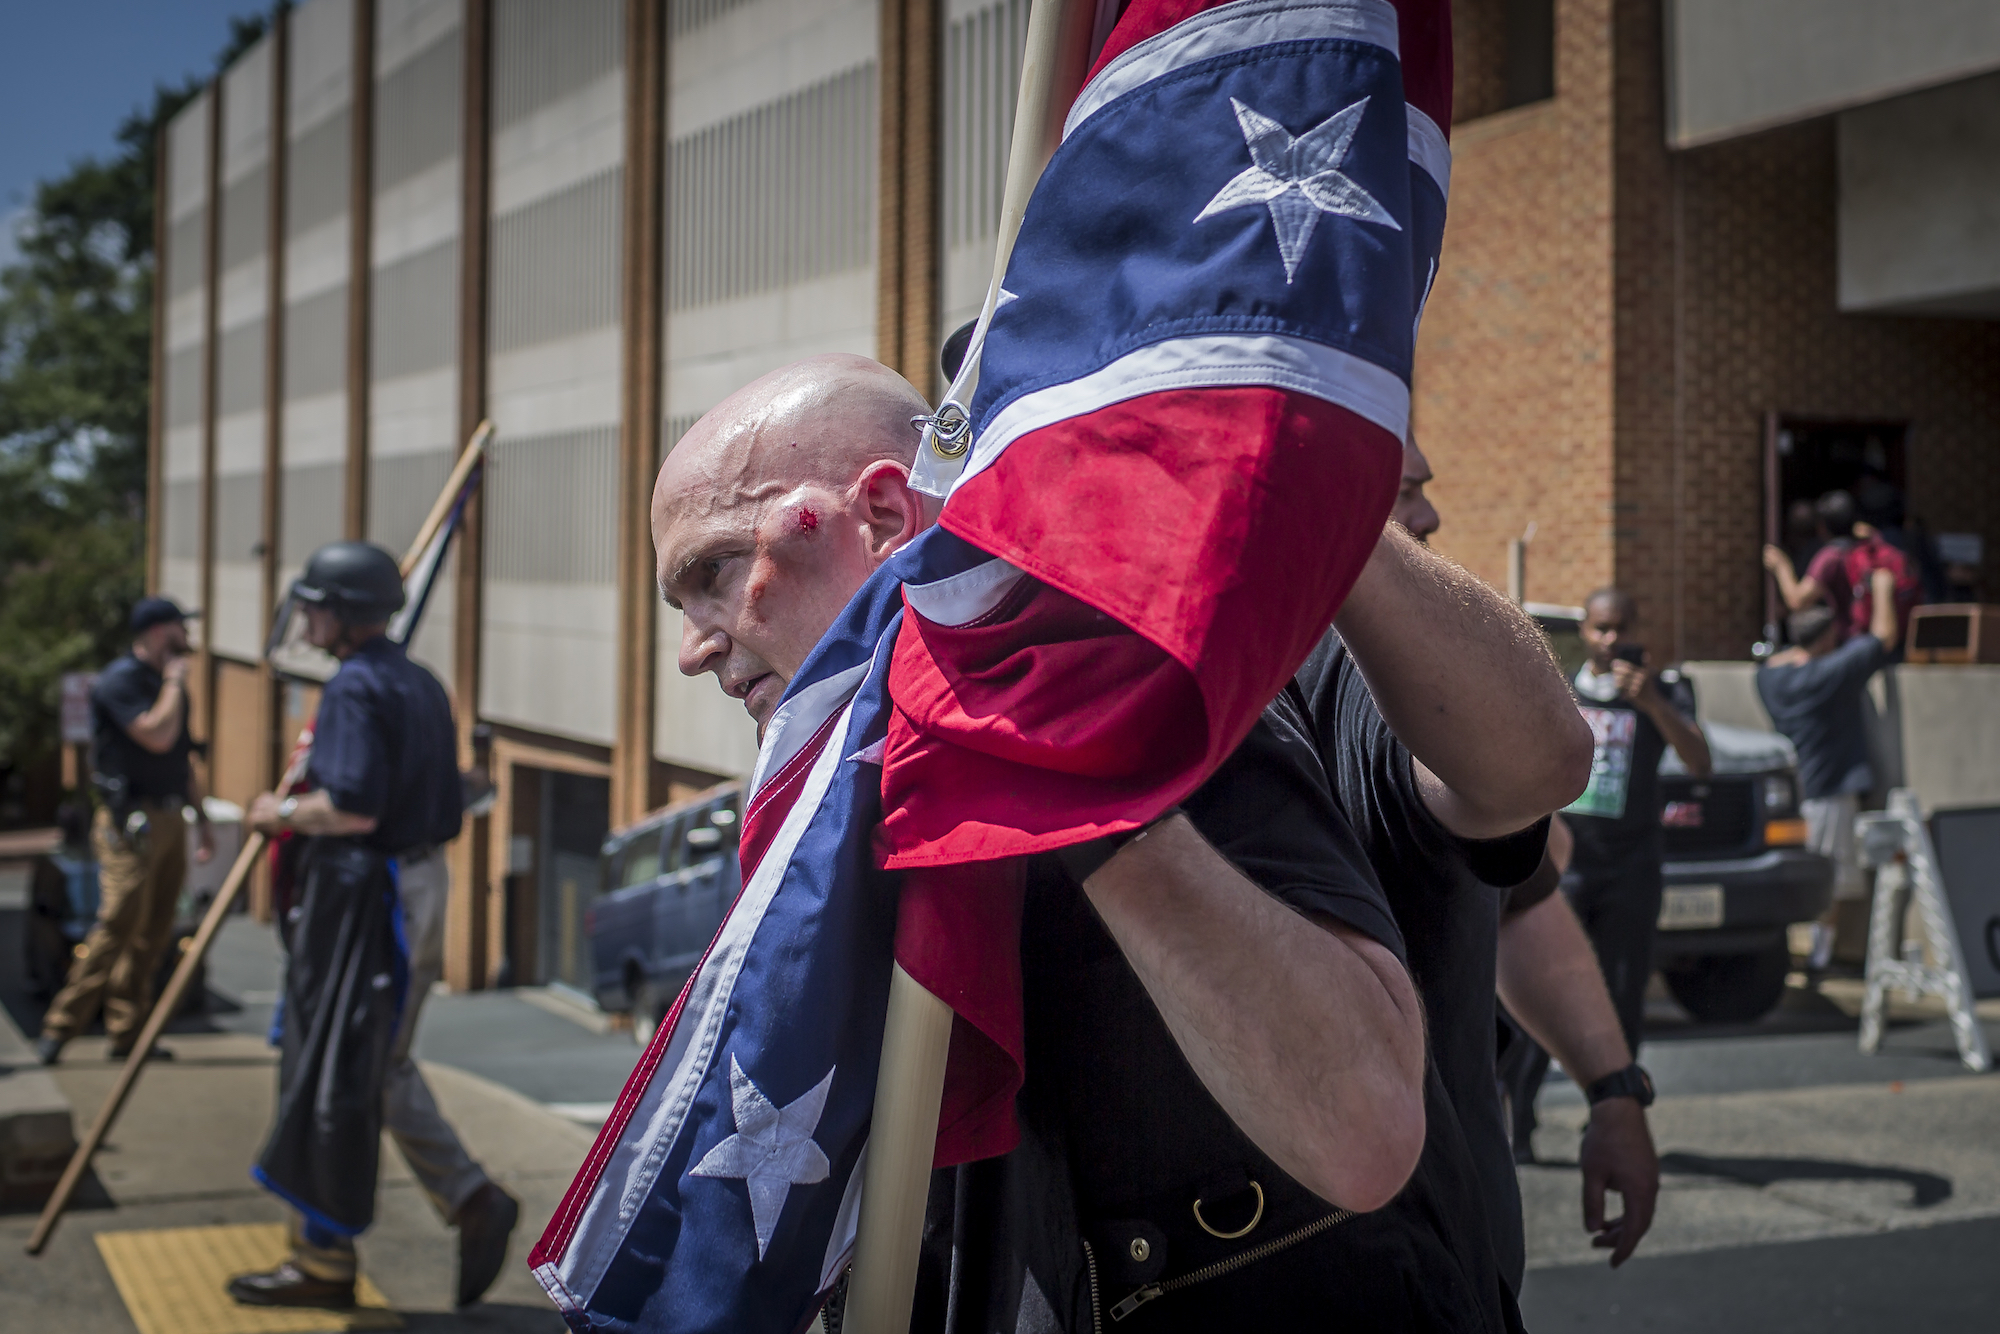 Poll: 31% of Americans Think Trump Supports White Nationalism